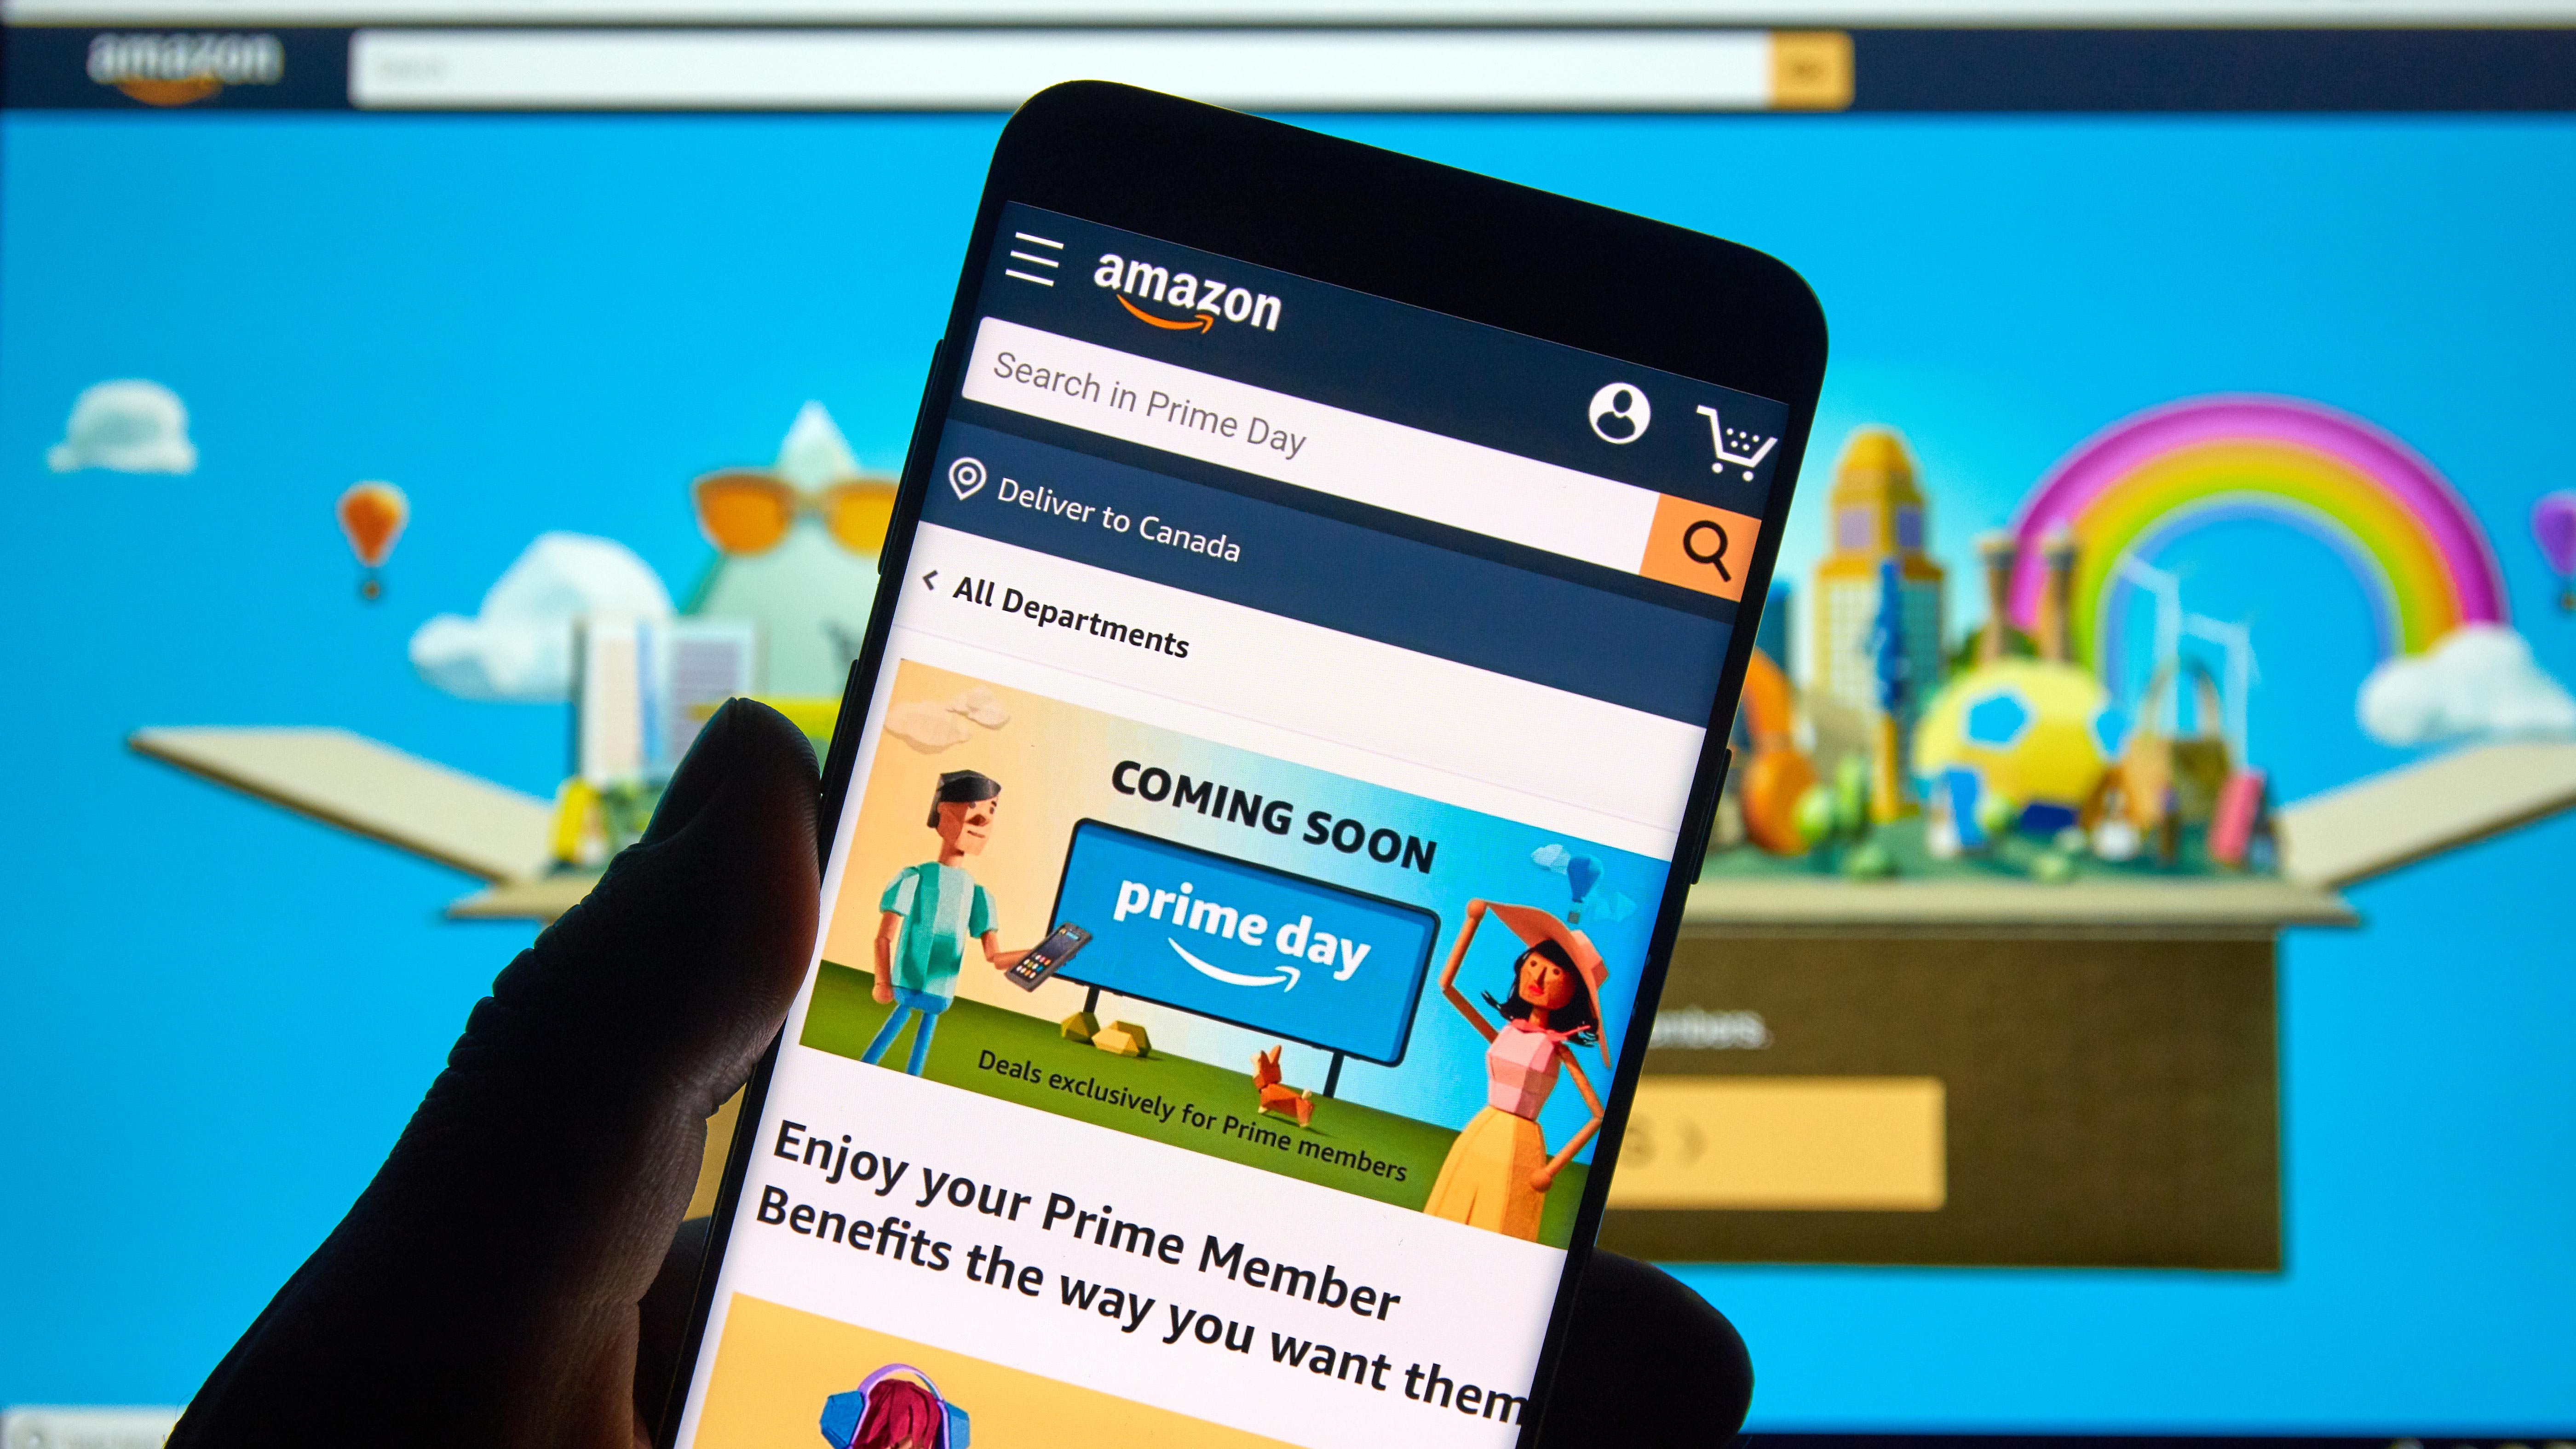 Person holding a phone looking at the Amazon app, with a monitor behind it showing the Amazon website